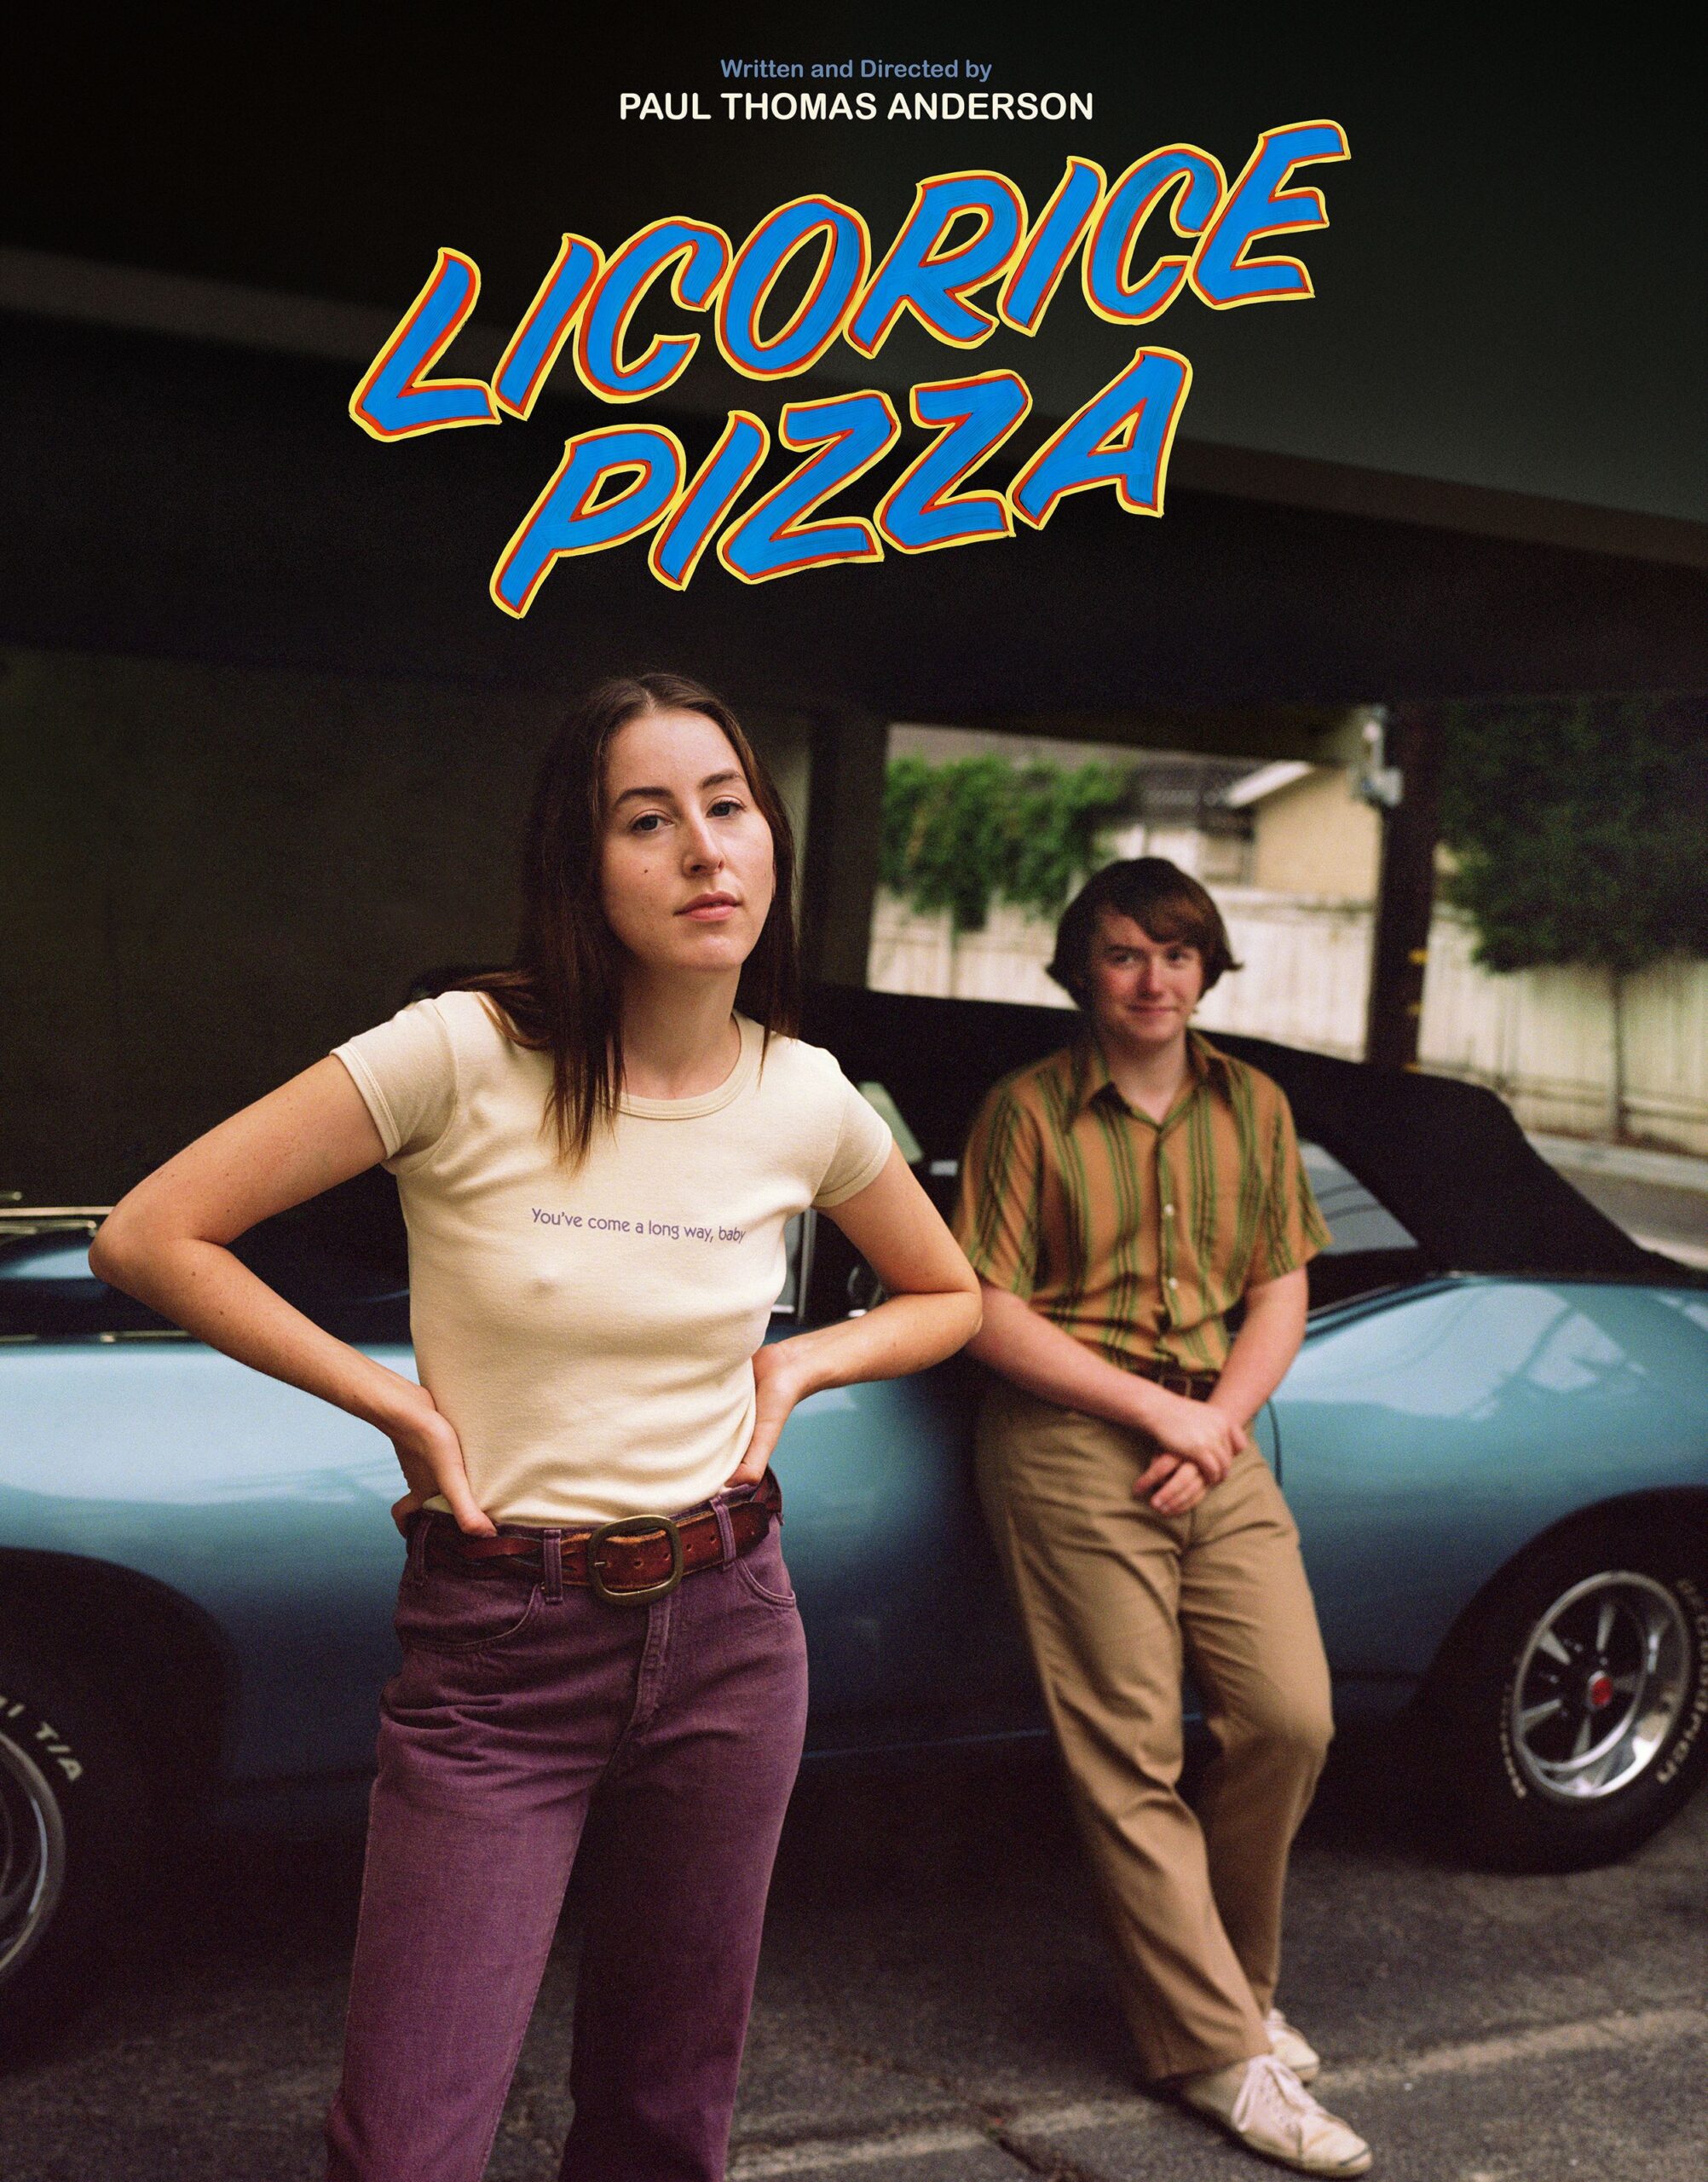 Where to watch Licorice Pizza